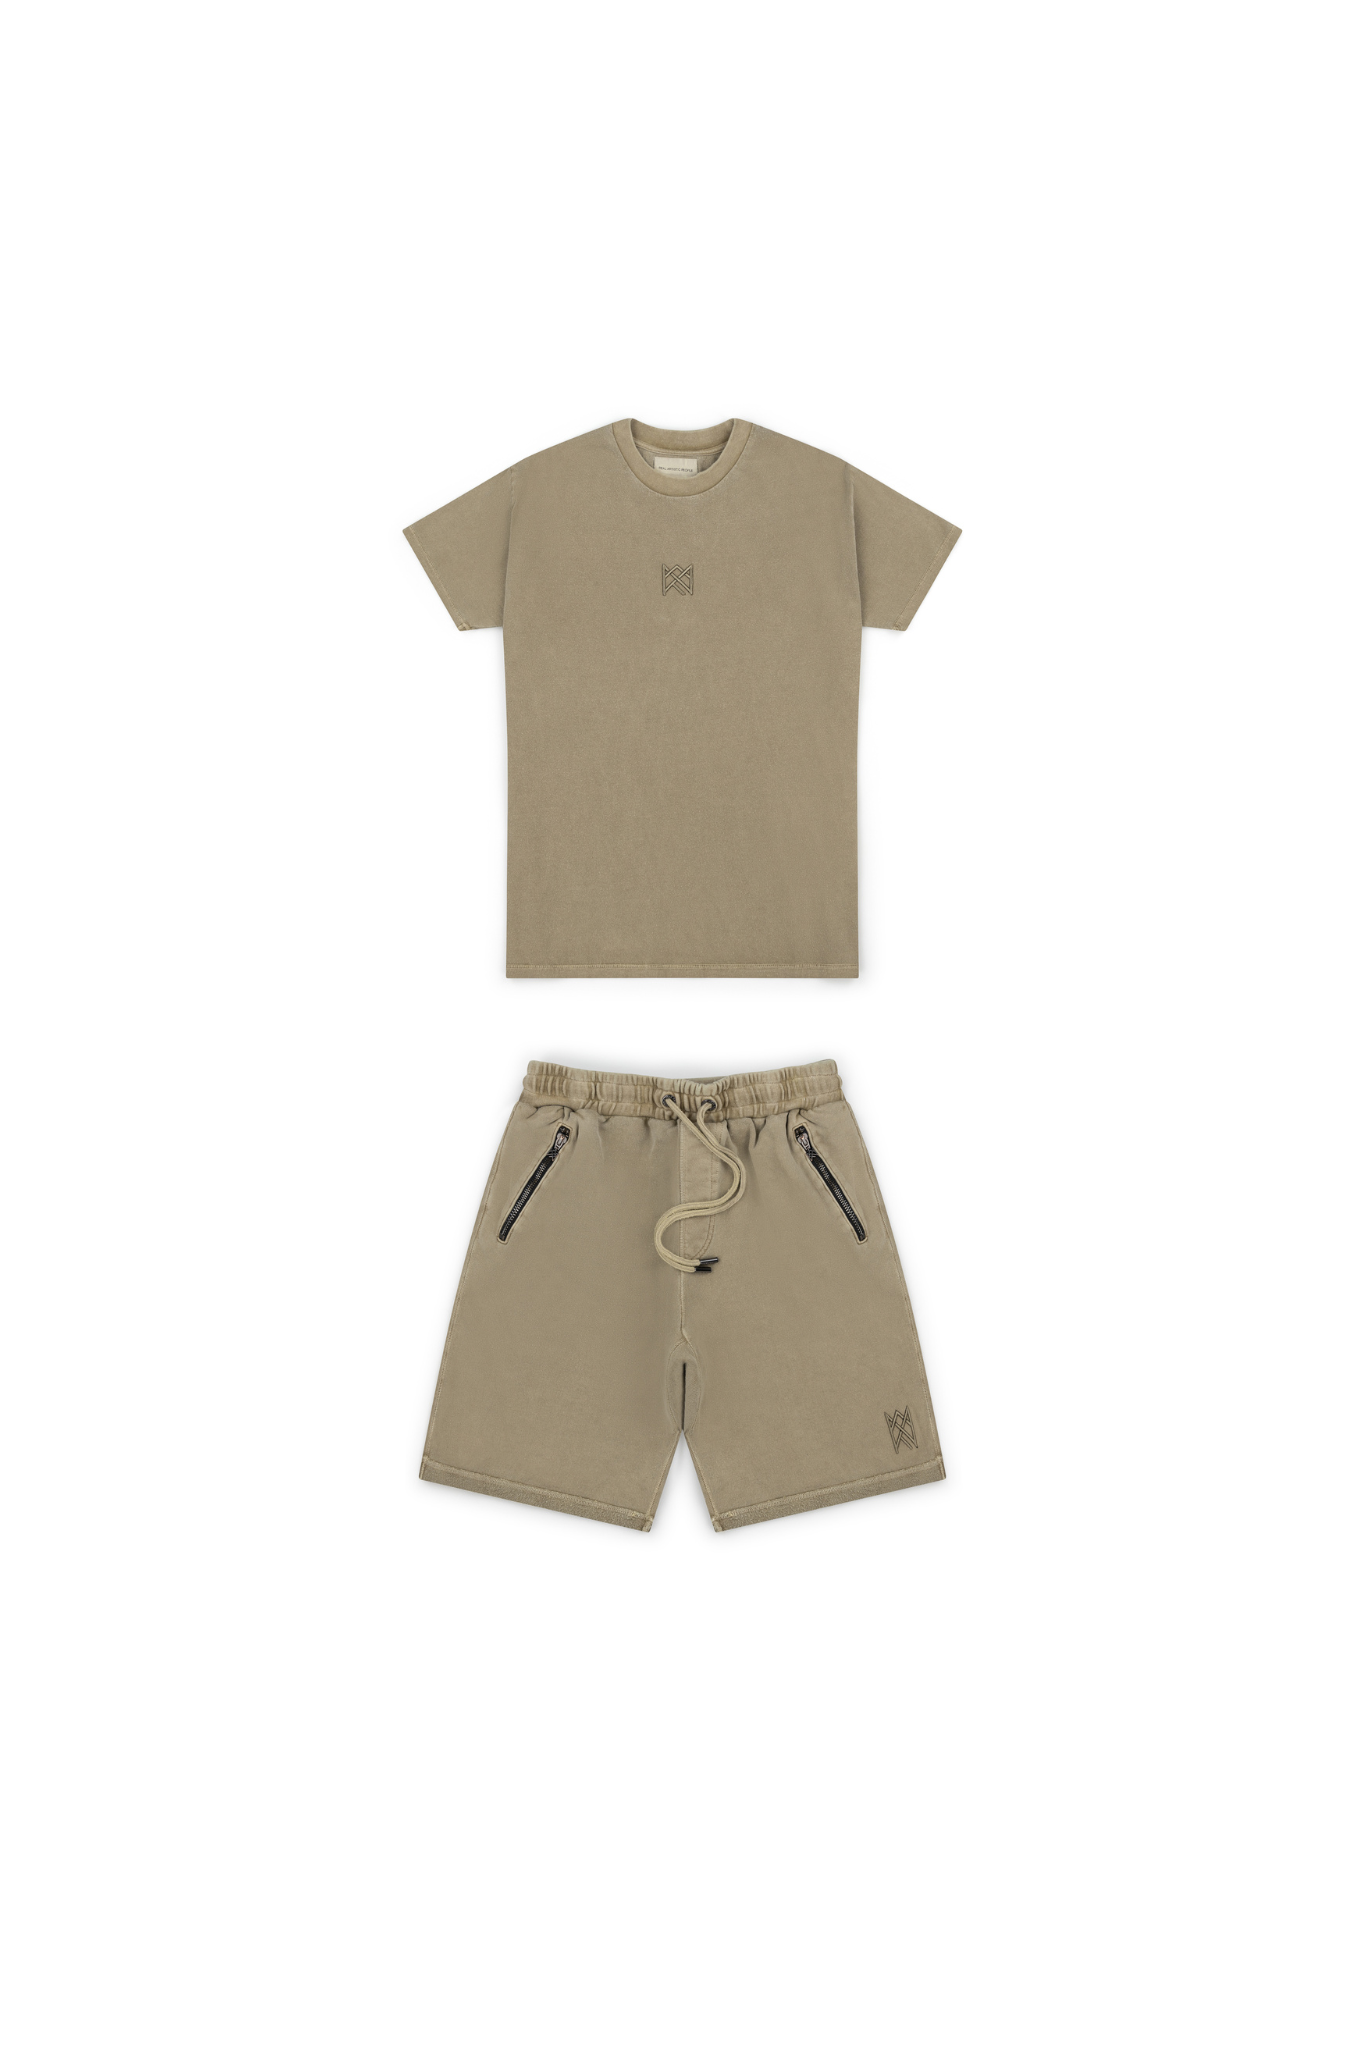 Real Artistic People - Heir Tee and Shorts Twin Set Vintage Olive